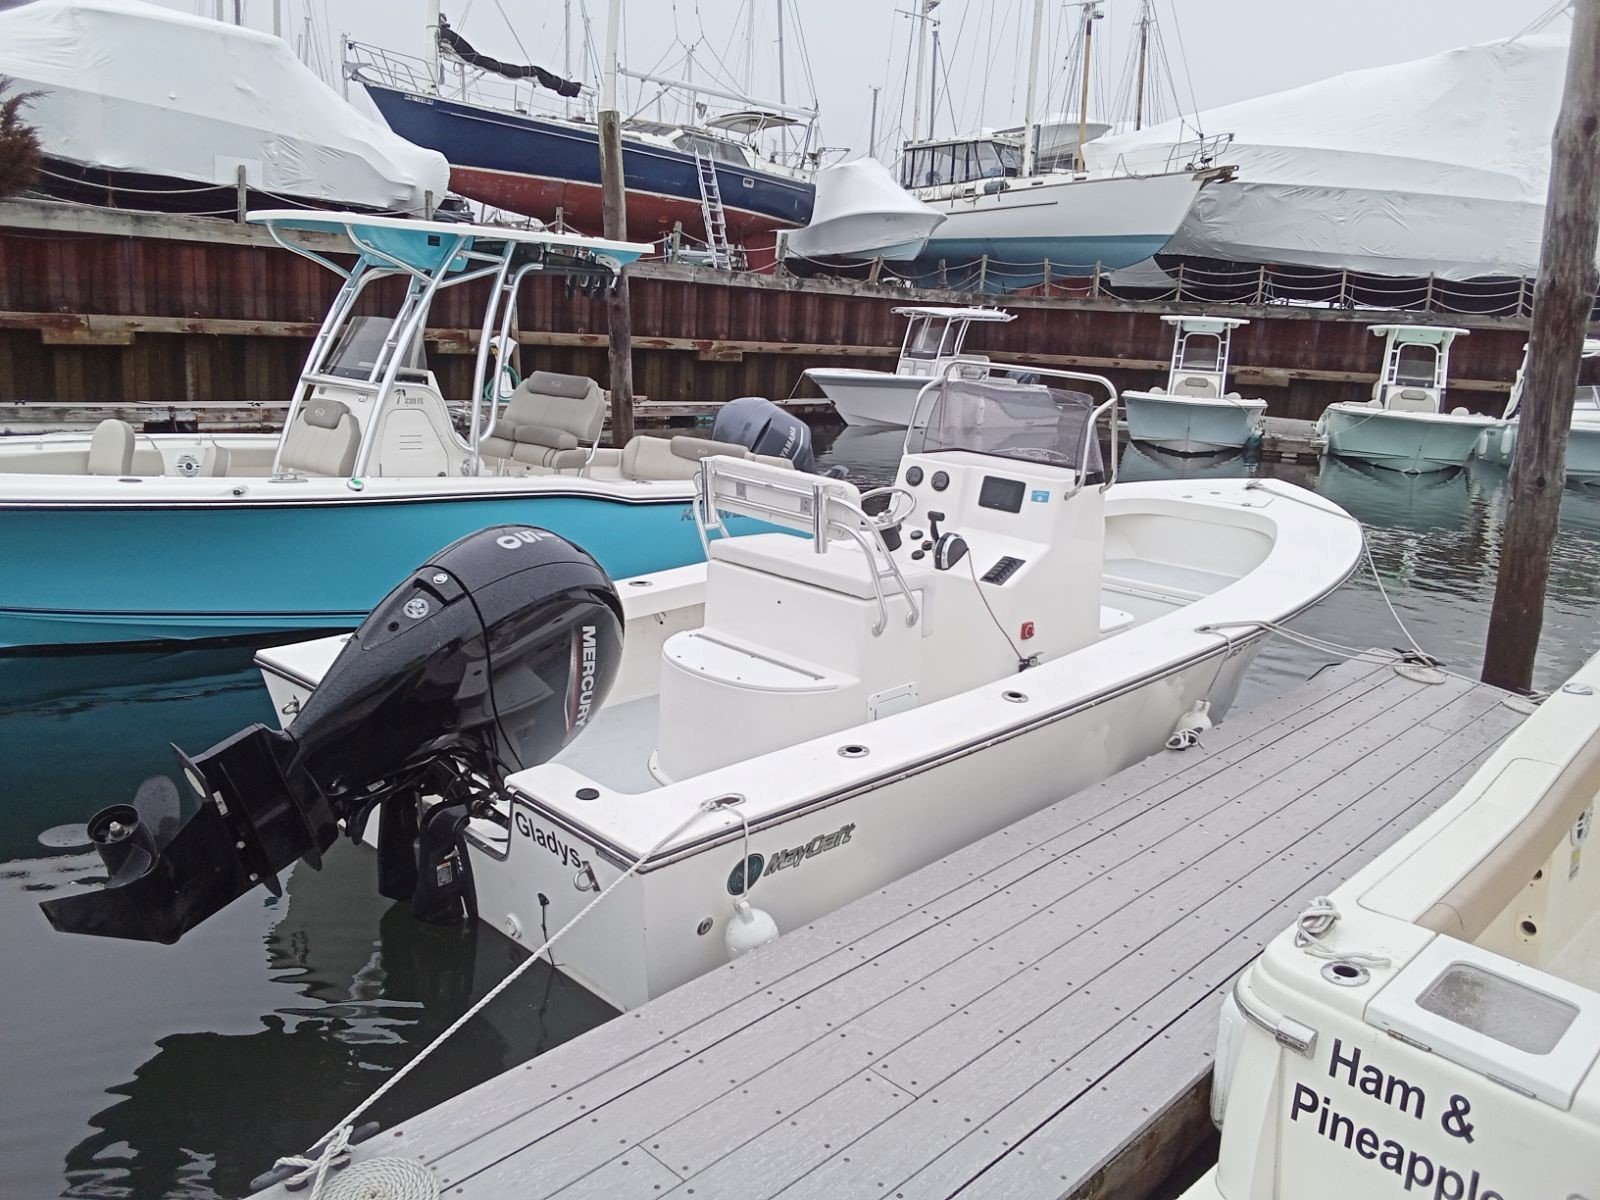 Gladys - 20' CC - NO TOP - Fishing oriented boat